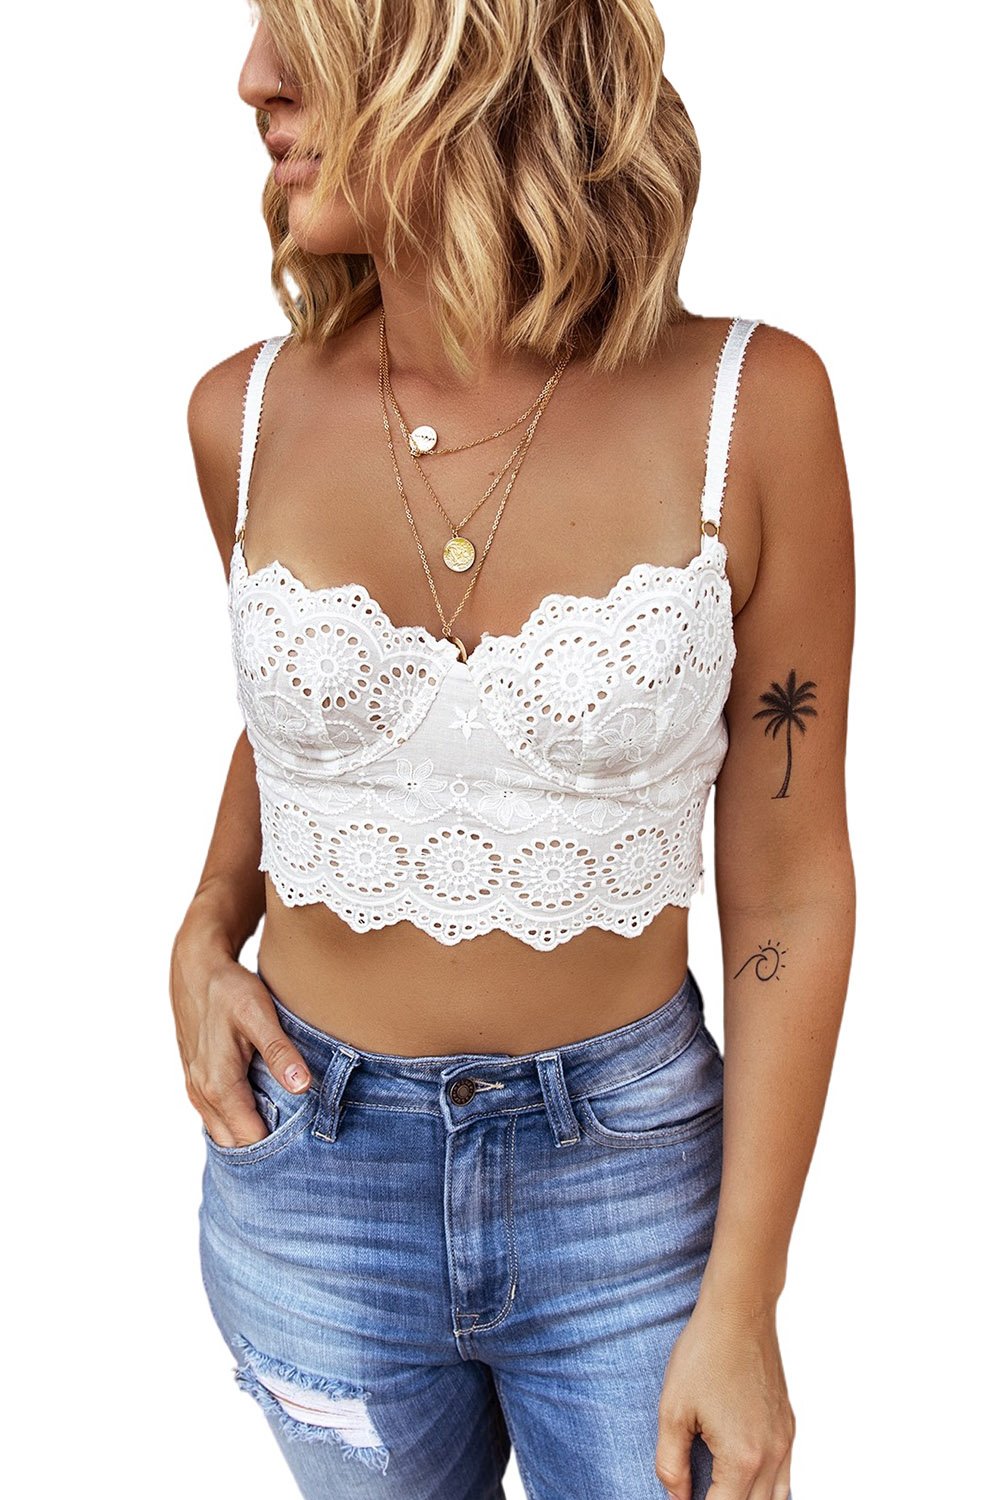 Chic White Adjustable Hollow Out Lace Bralette